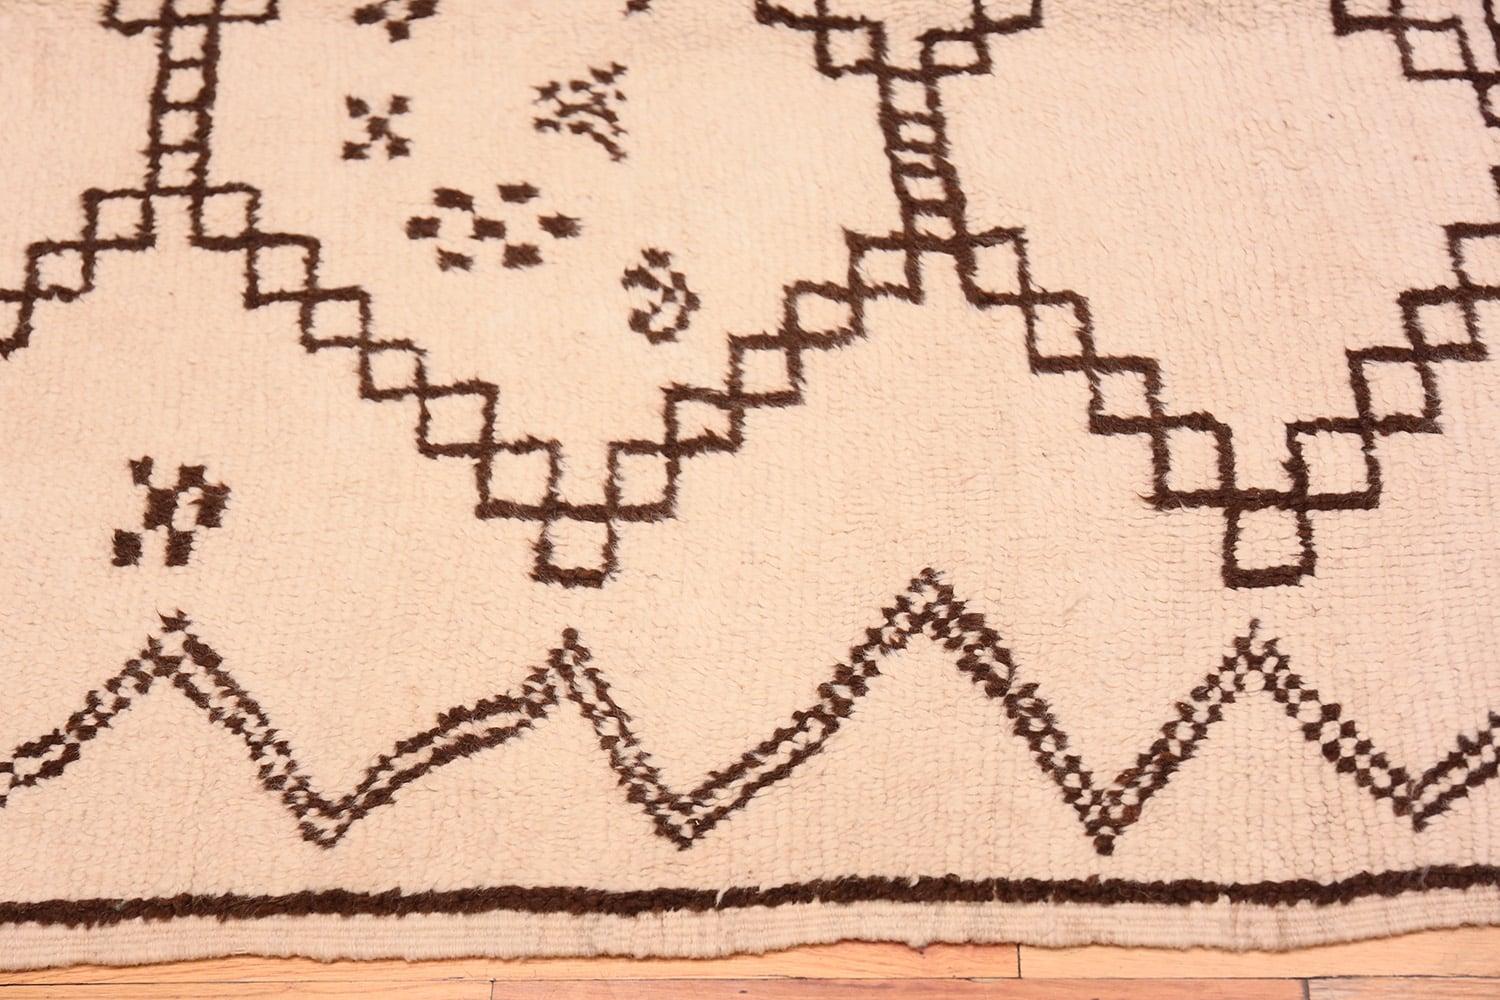 Vintage ivory and brown Moroccan rug, origin: Morocco, circa mid-20th century. Size: 4 ft 5 in x 7 ft (1.35 m x 2.13 m). 

Here is a unique and thought-provoking vintage carpet – a mid-century Moroccan rug, characterized by a beautiful and typical